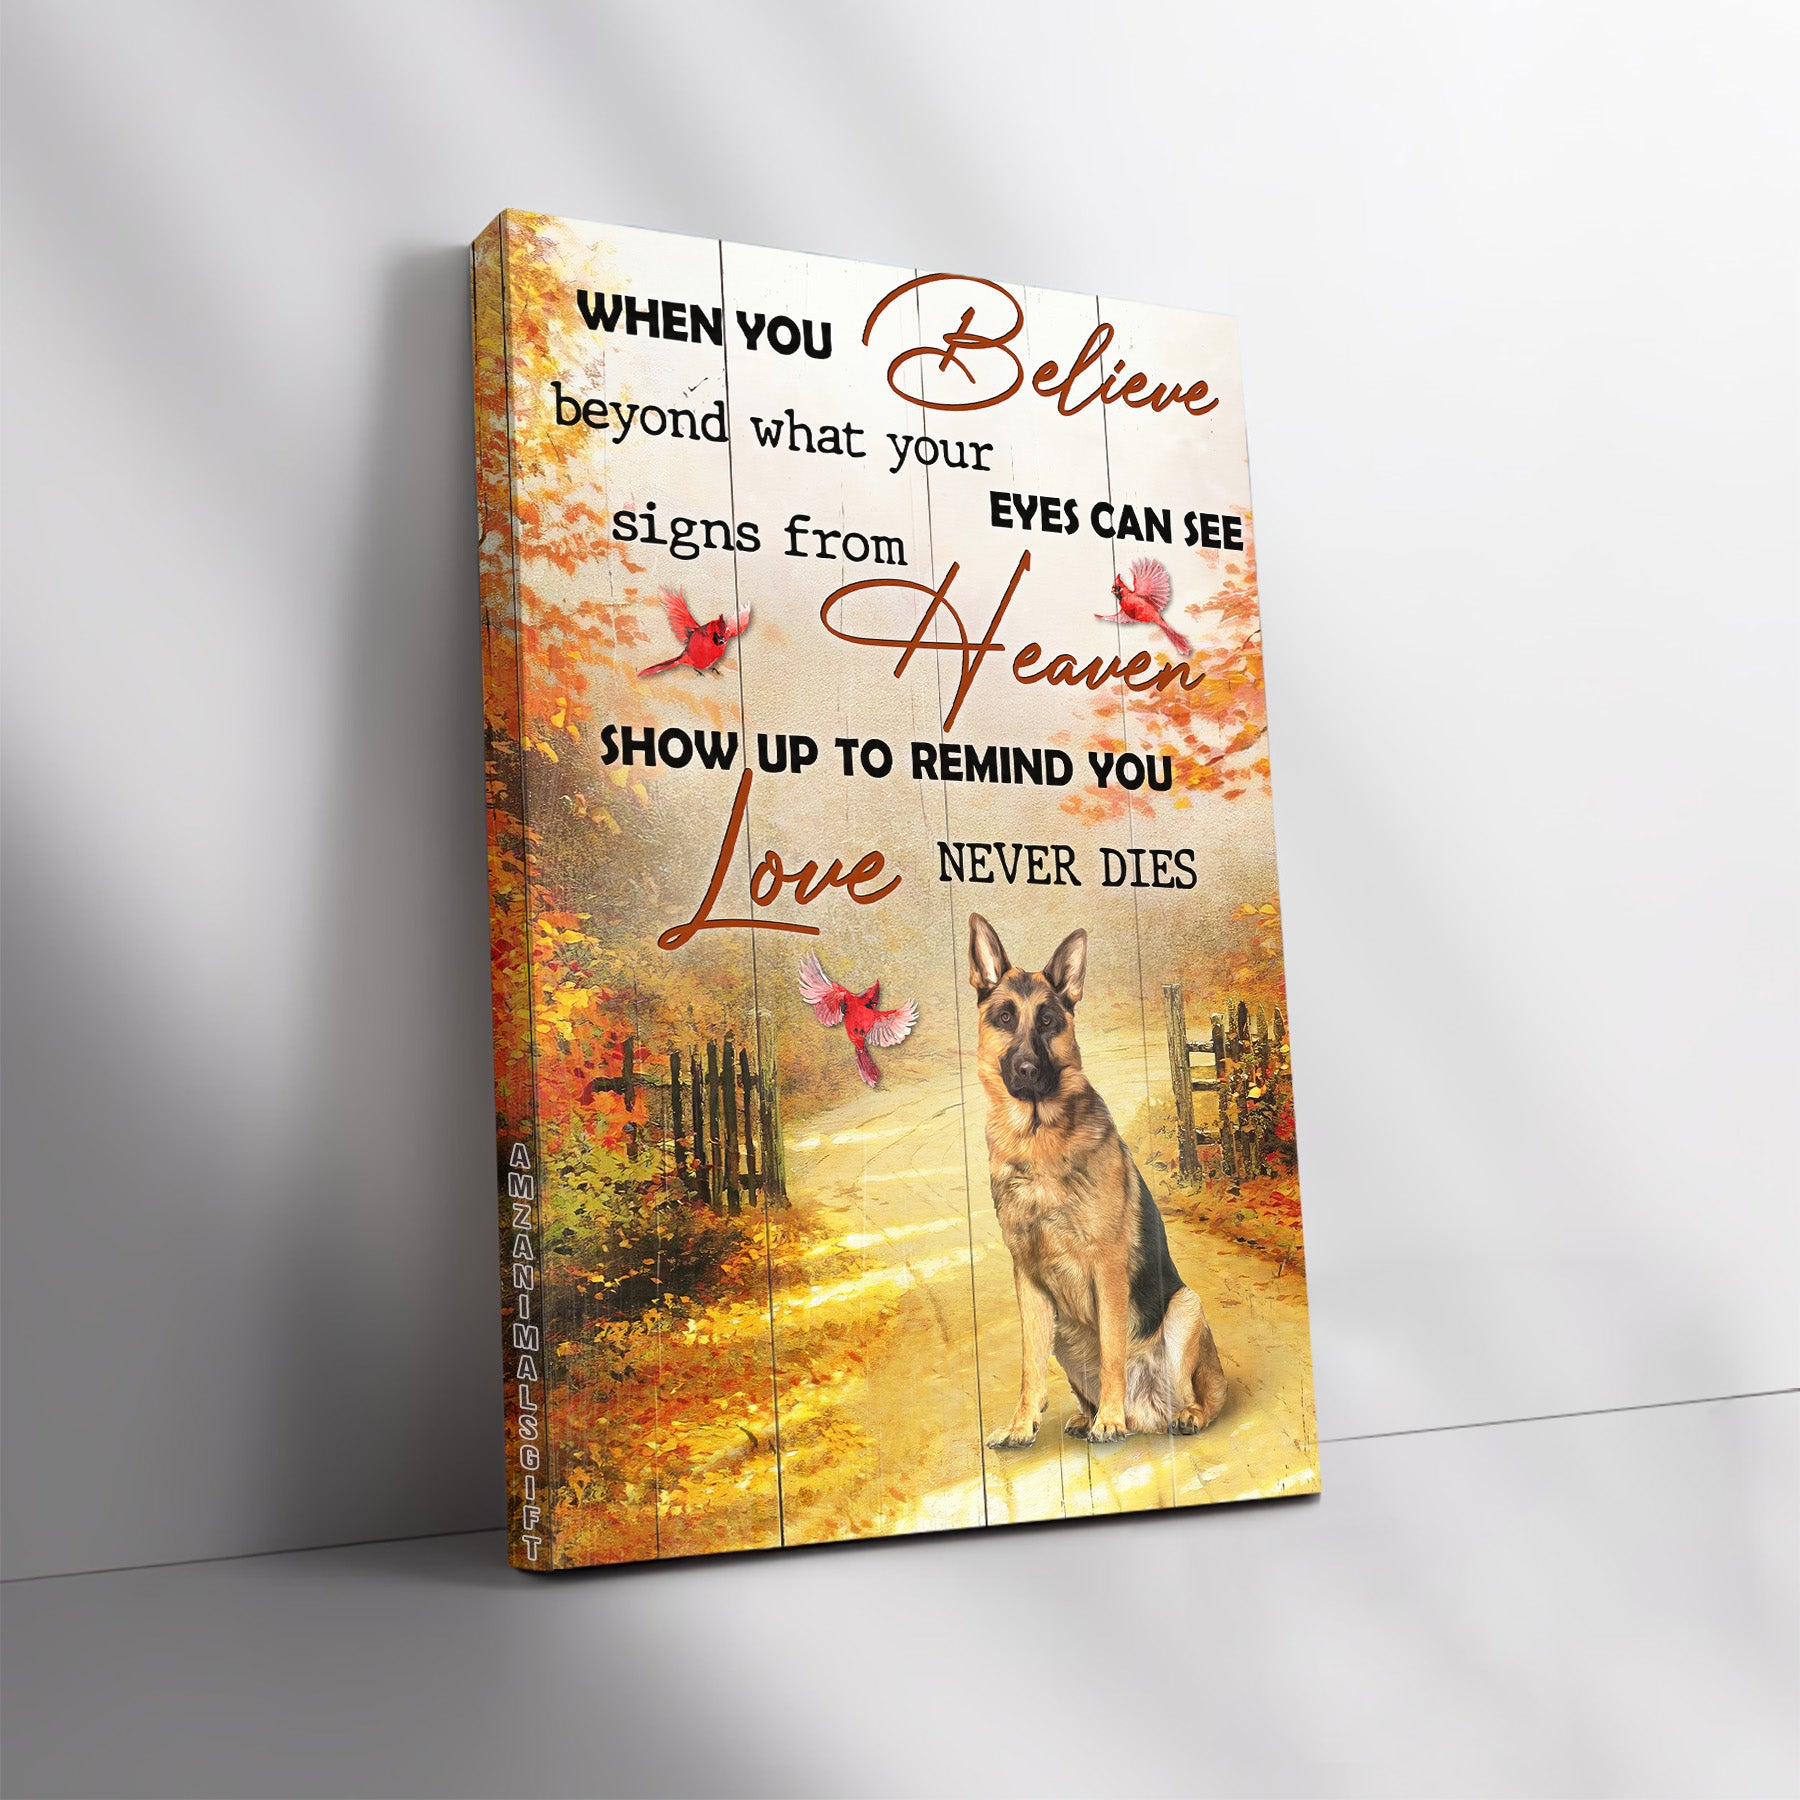 German Shepherd Premium Wrapped Portrait Canvas - Autumn Forest, German Shepherd, Heaven Show Up To Remind Love Never Dies - Gift For Members Family